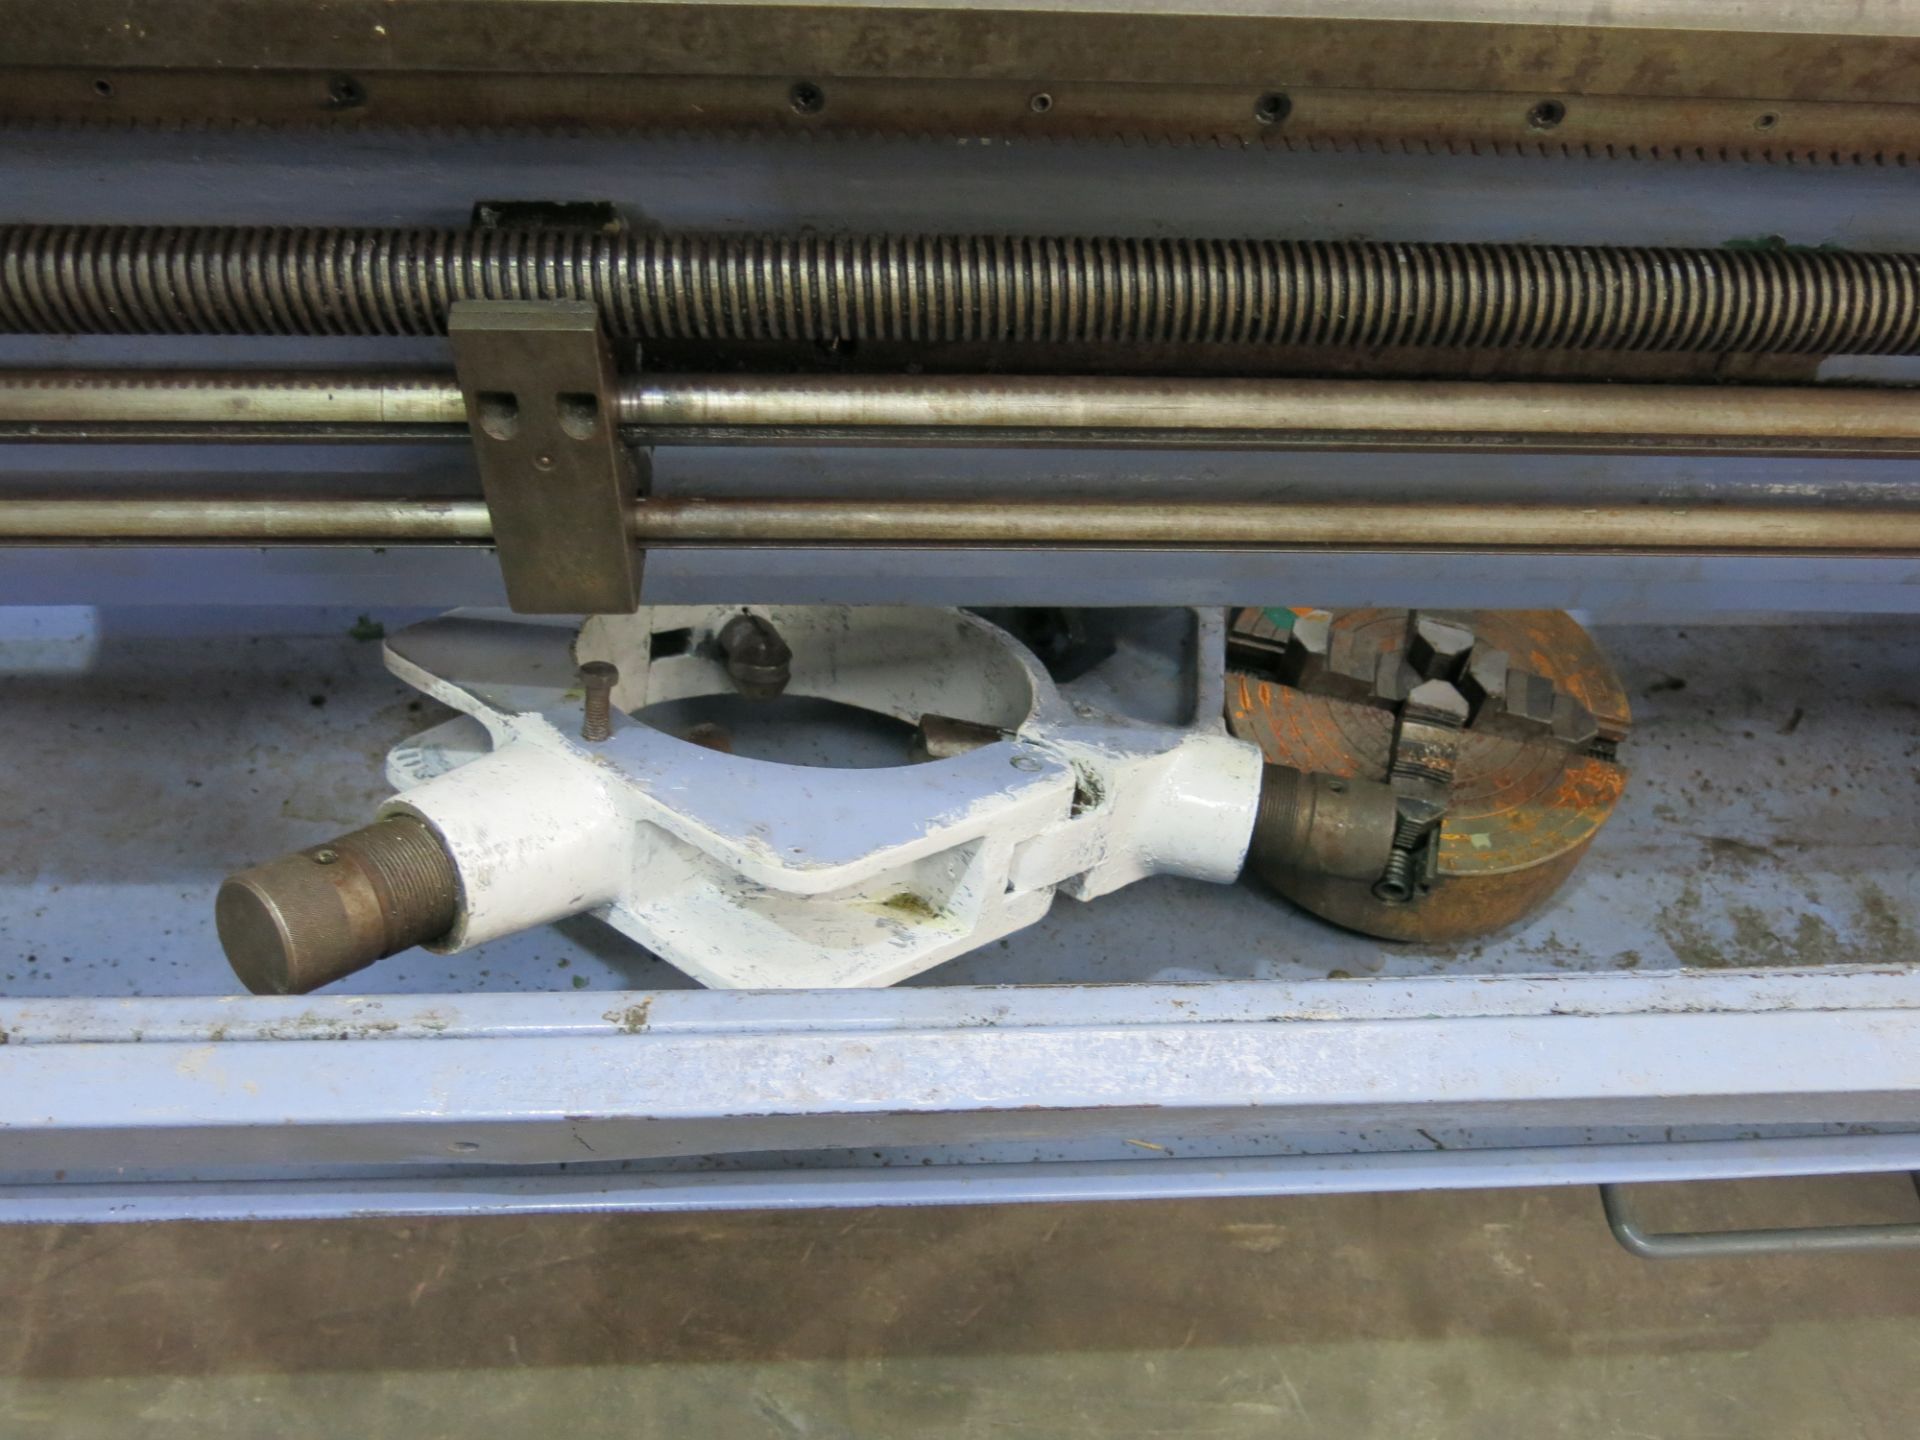 * Colchester Mastiff 1400 Gap Bed Centre Lathe, 21'' swing x 100'' between centres. Please note - Image 4 of 6